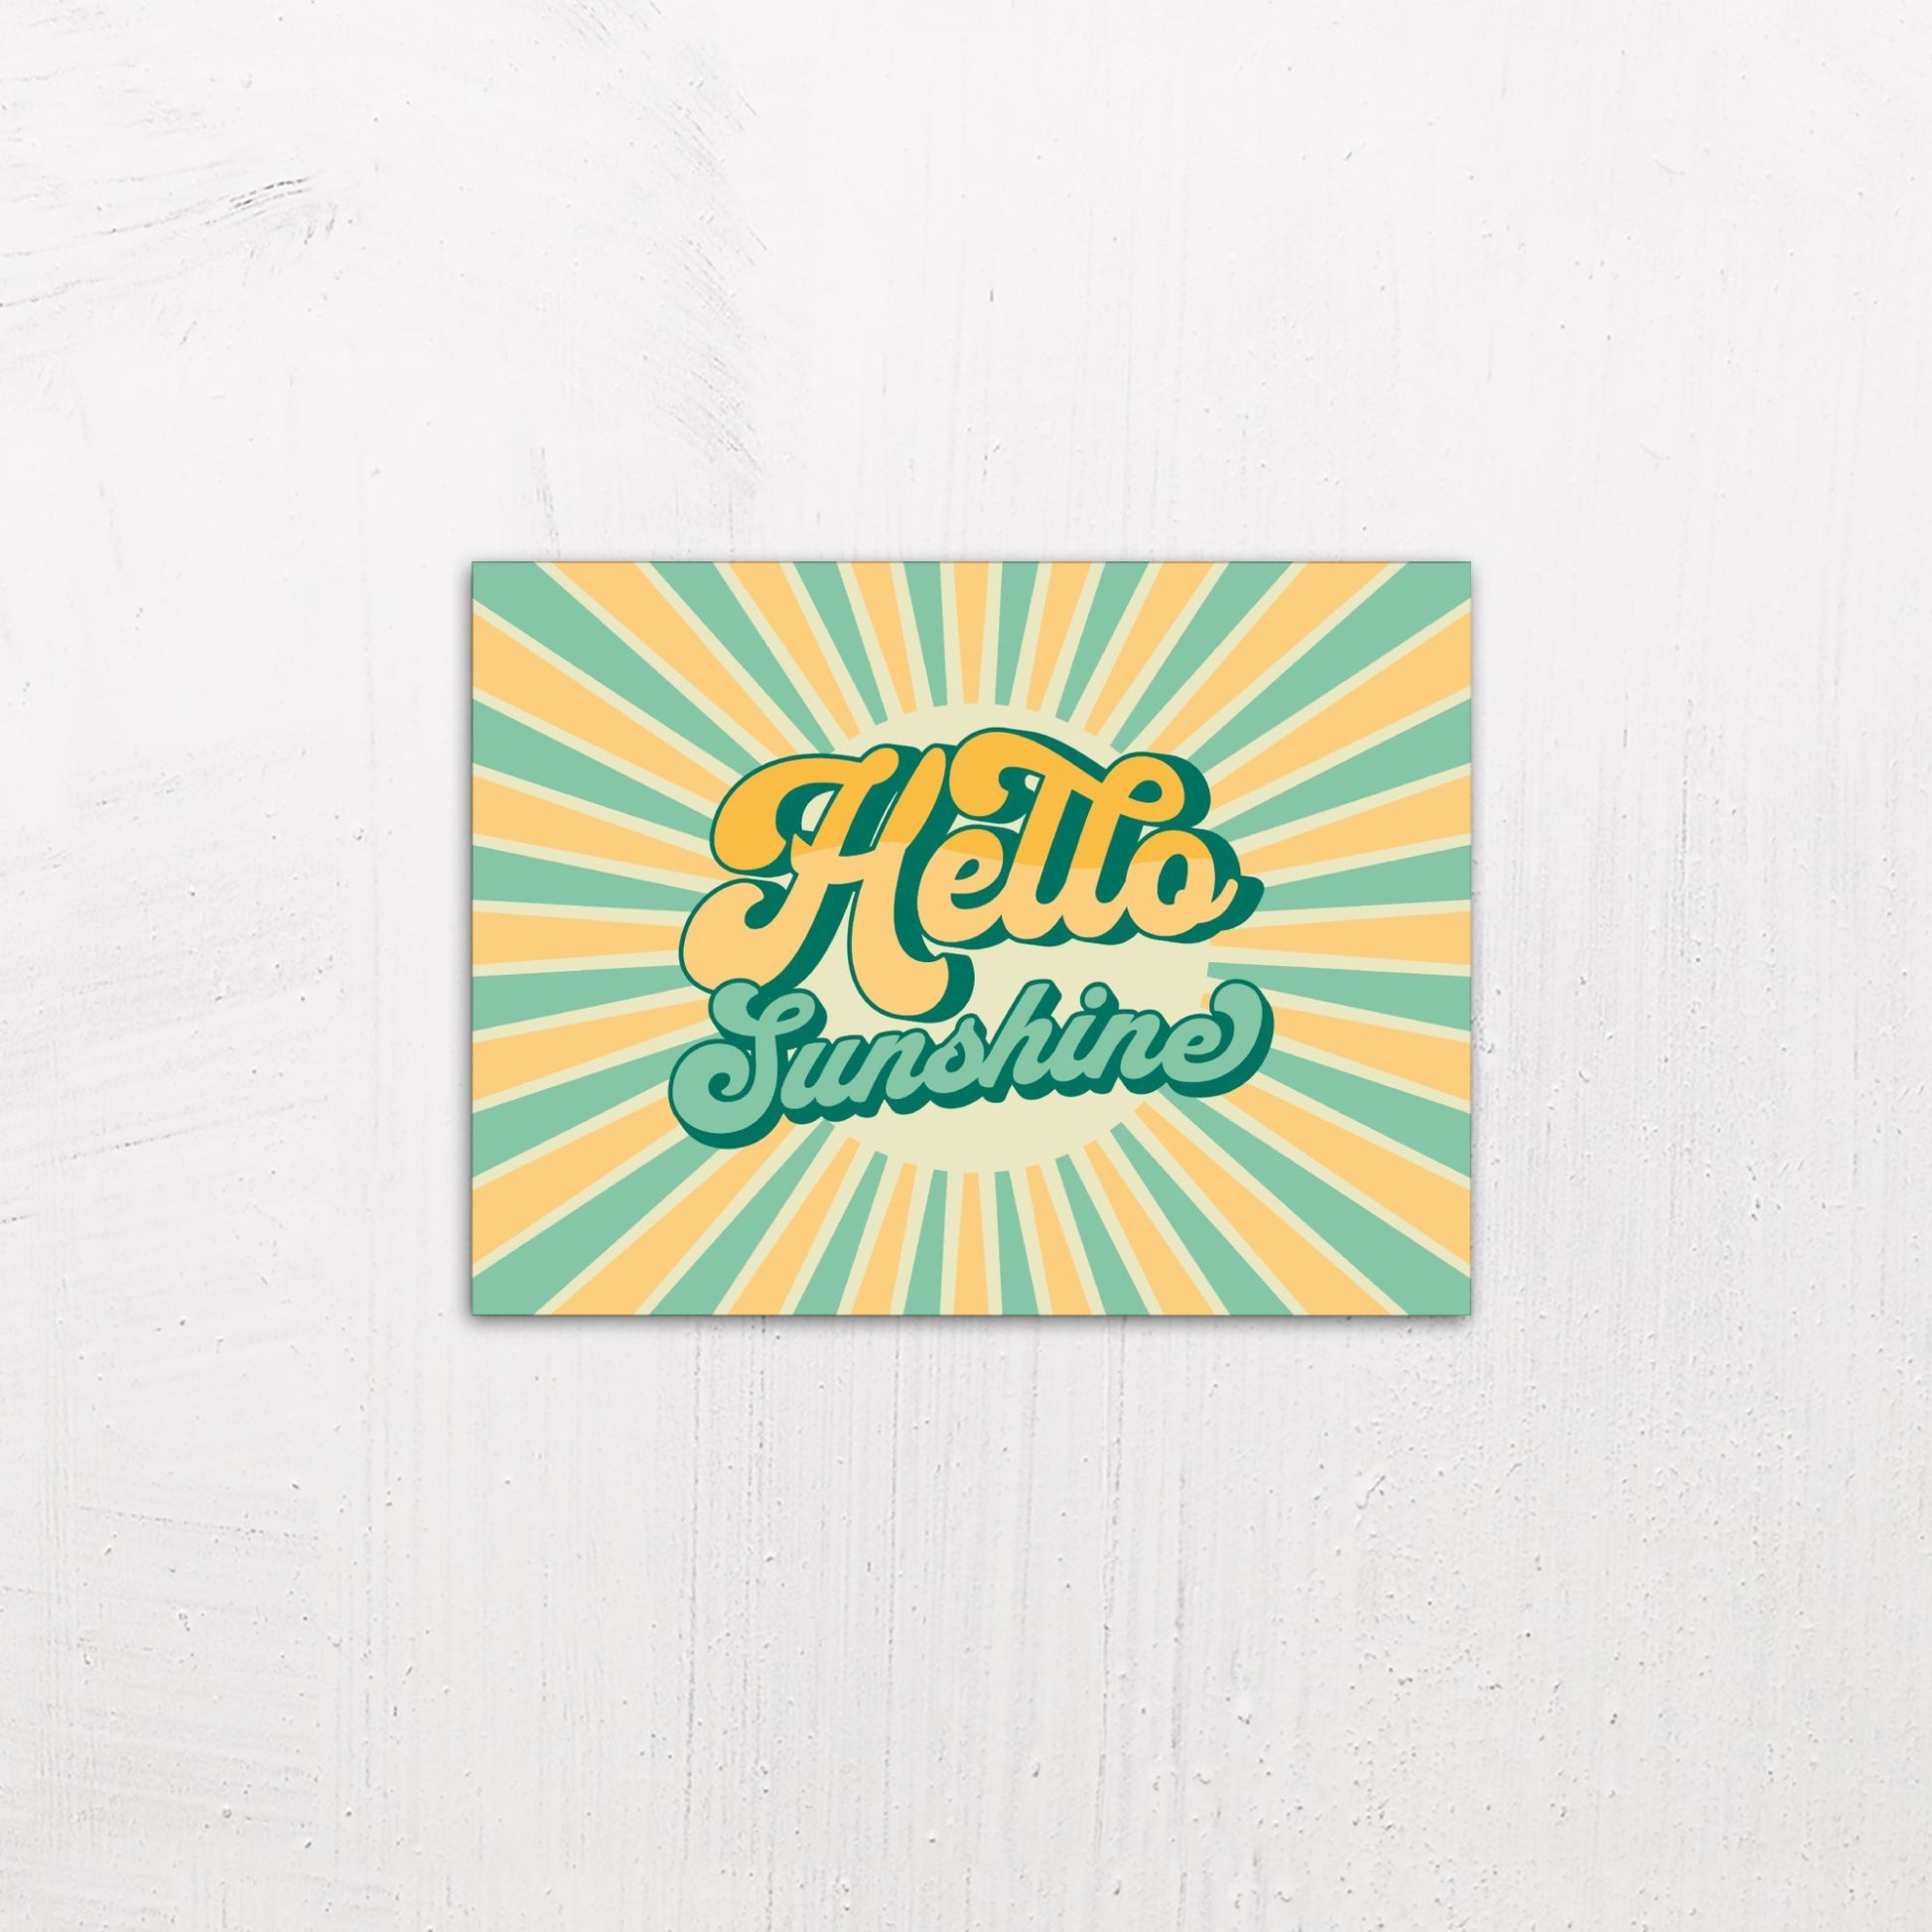 A small size metal art poster display plate with printed design of a Hello Sunshine Quote